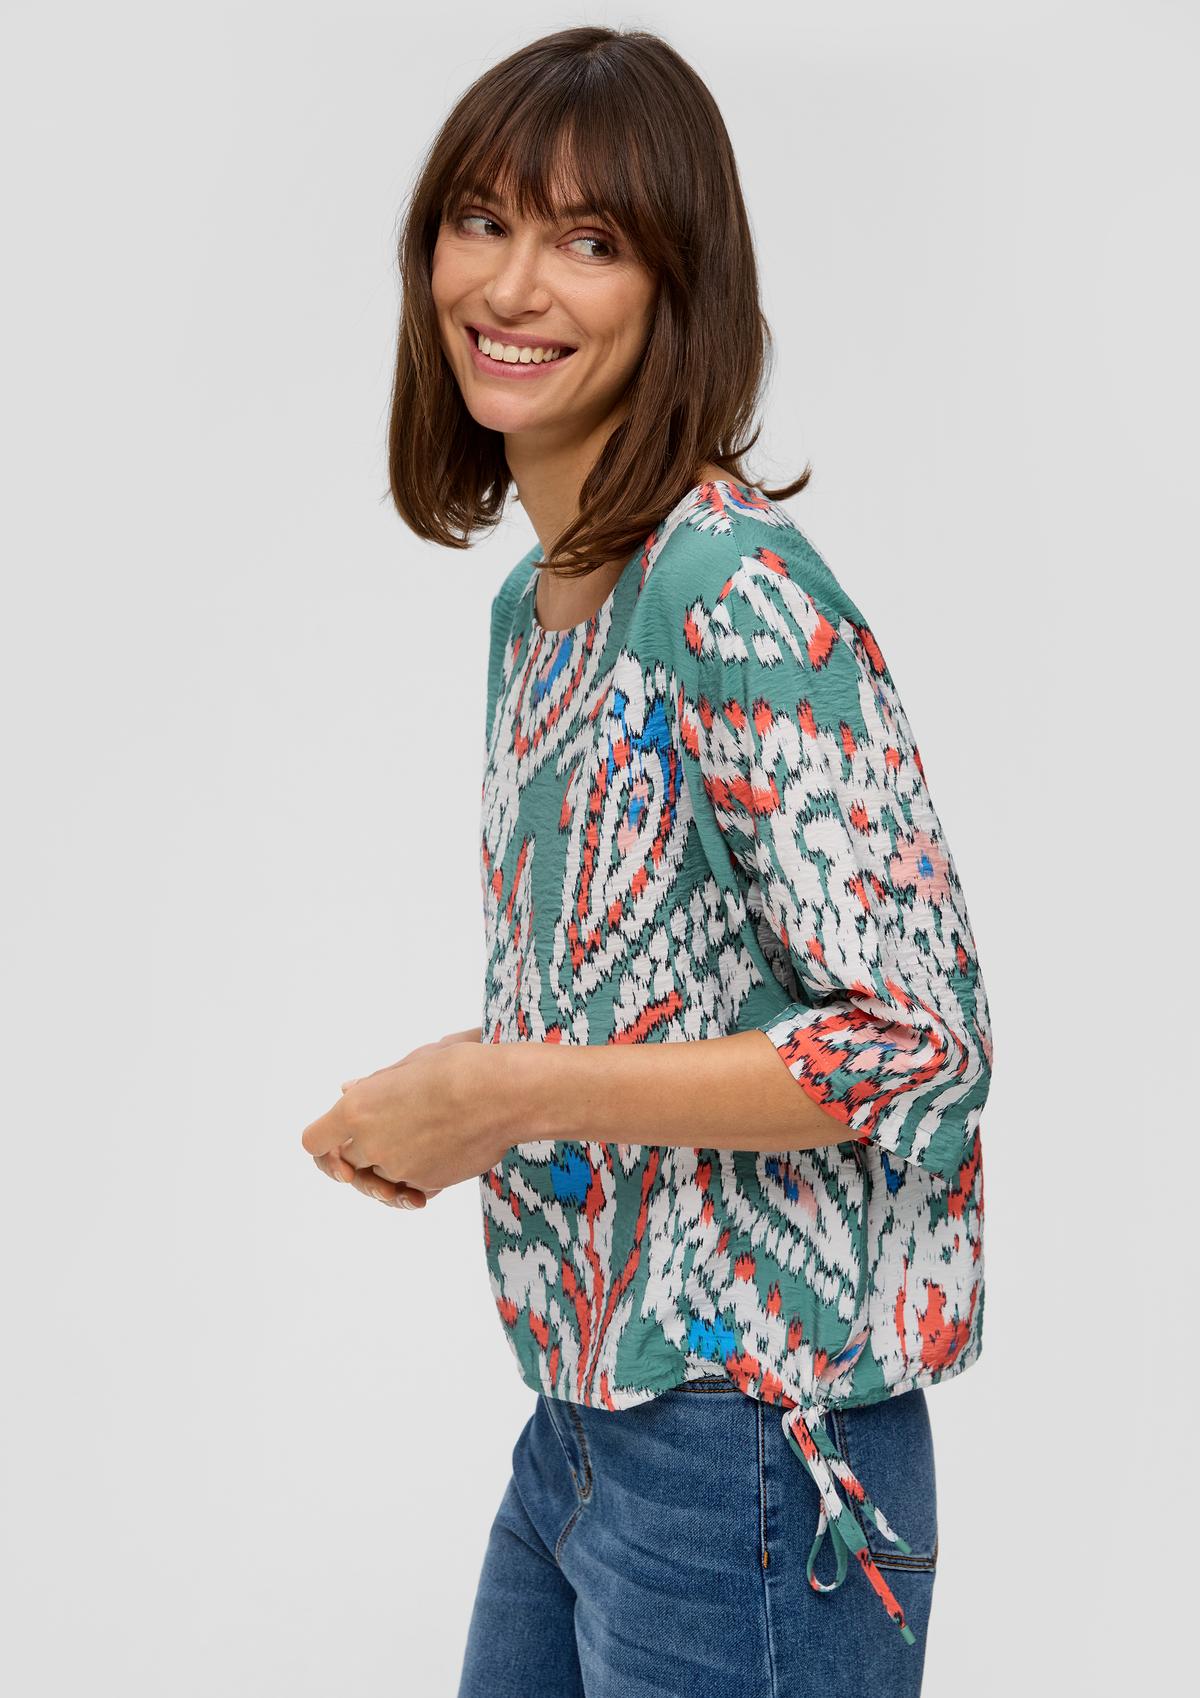 Blouse top with an all-over print